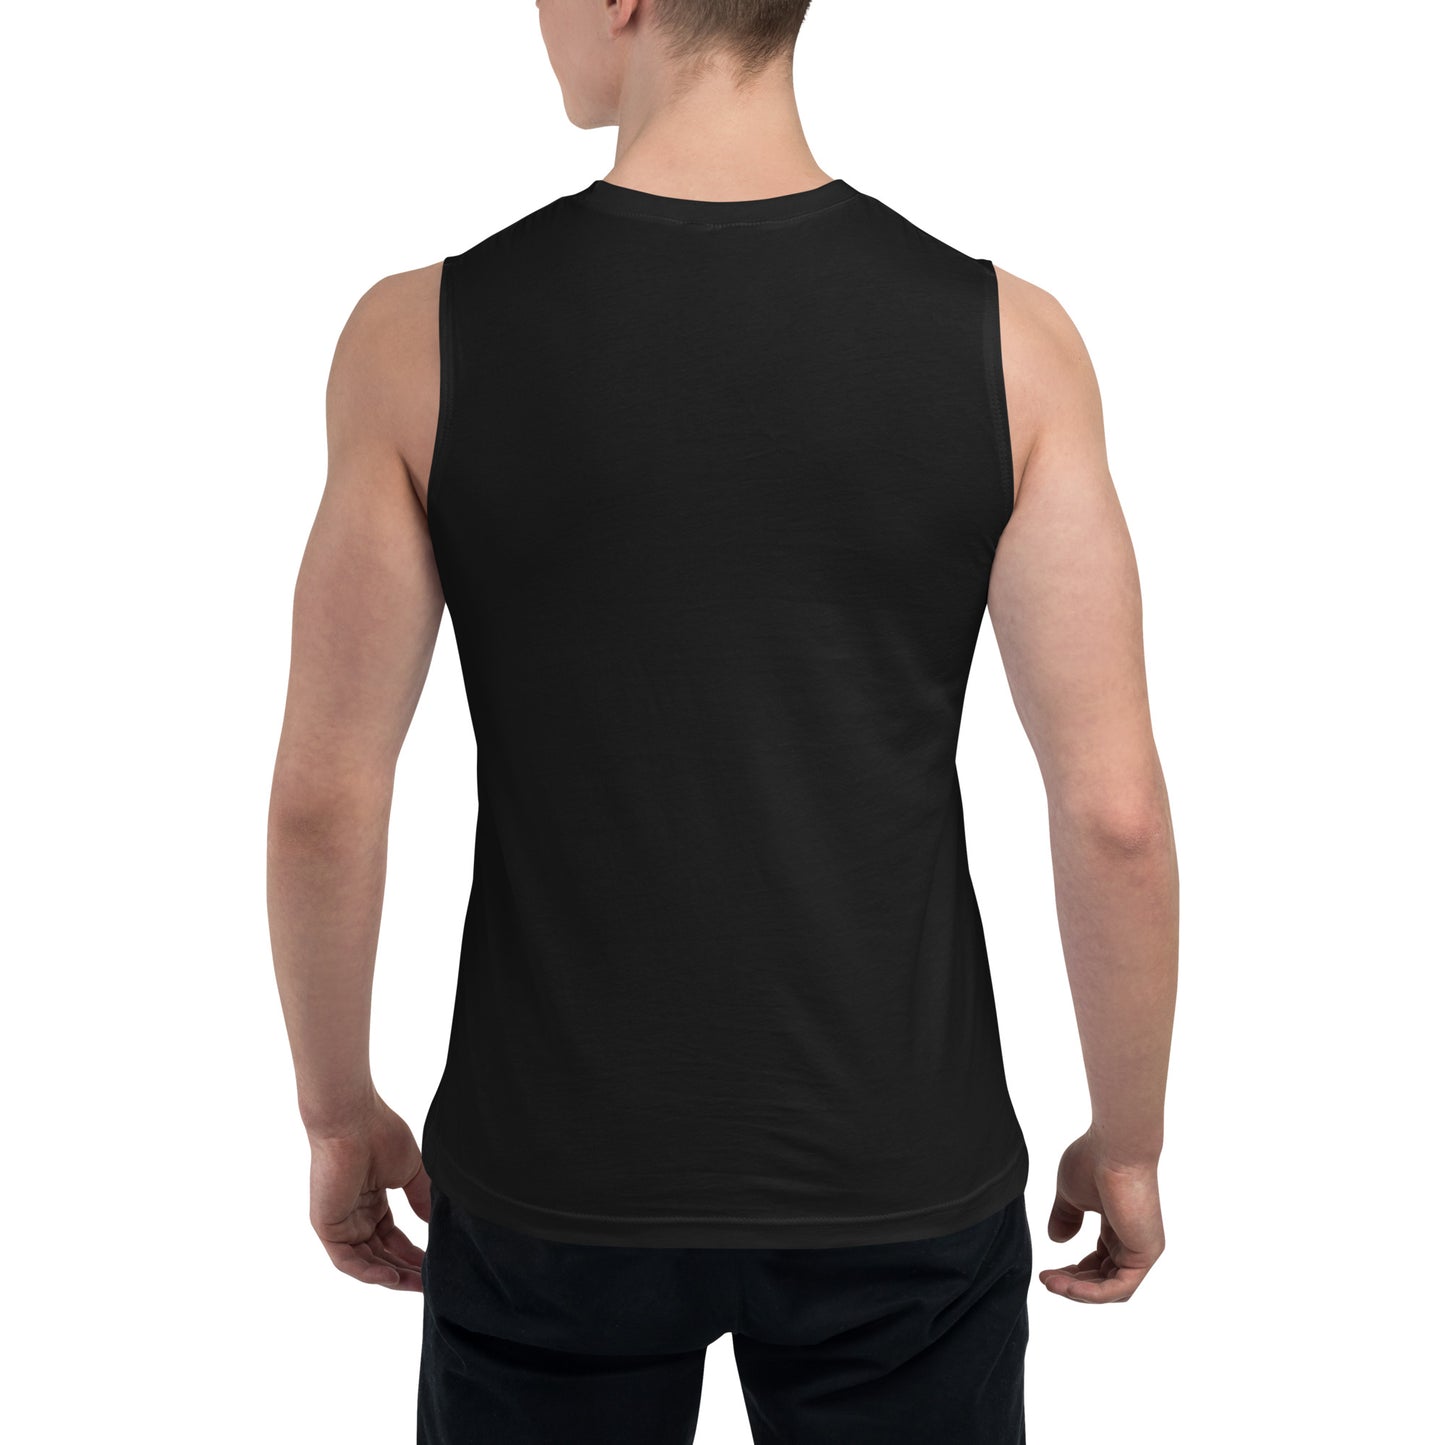 ALWAYS LOOK UP Muscle Shirt